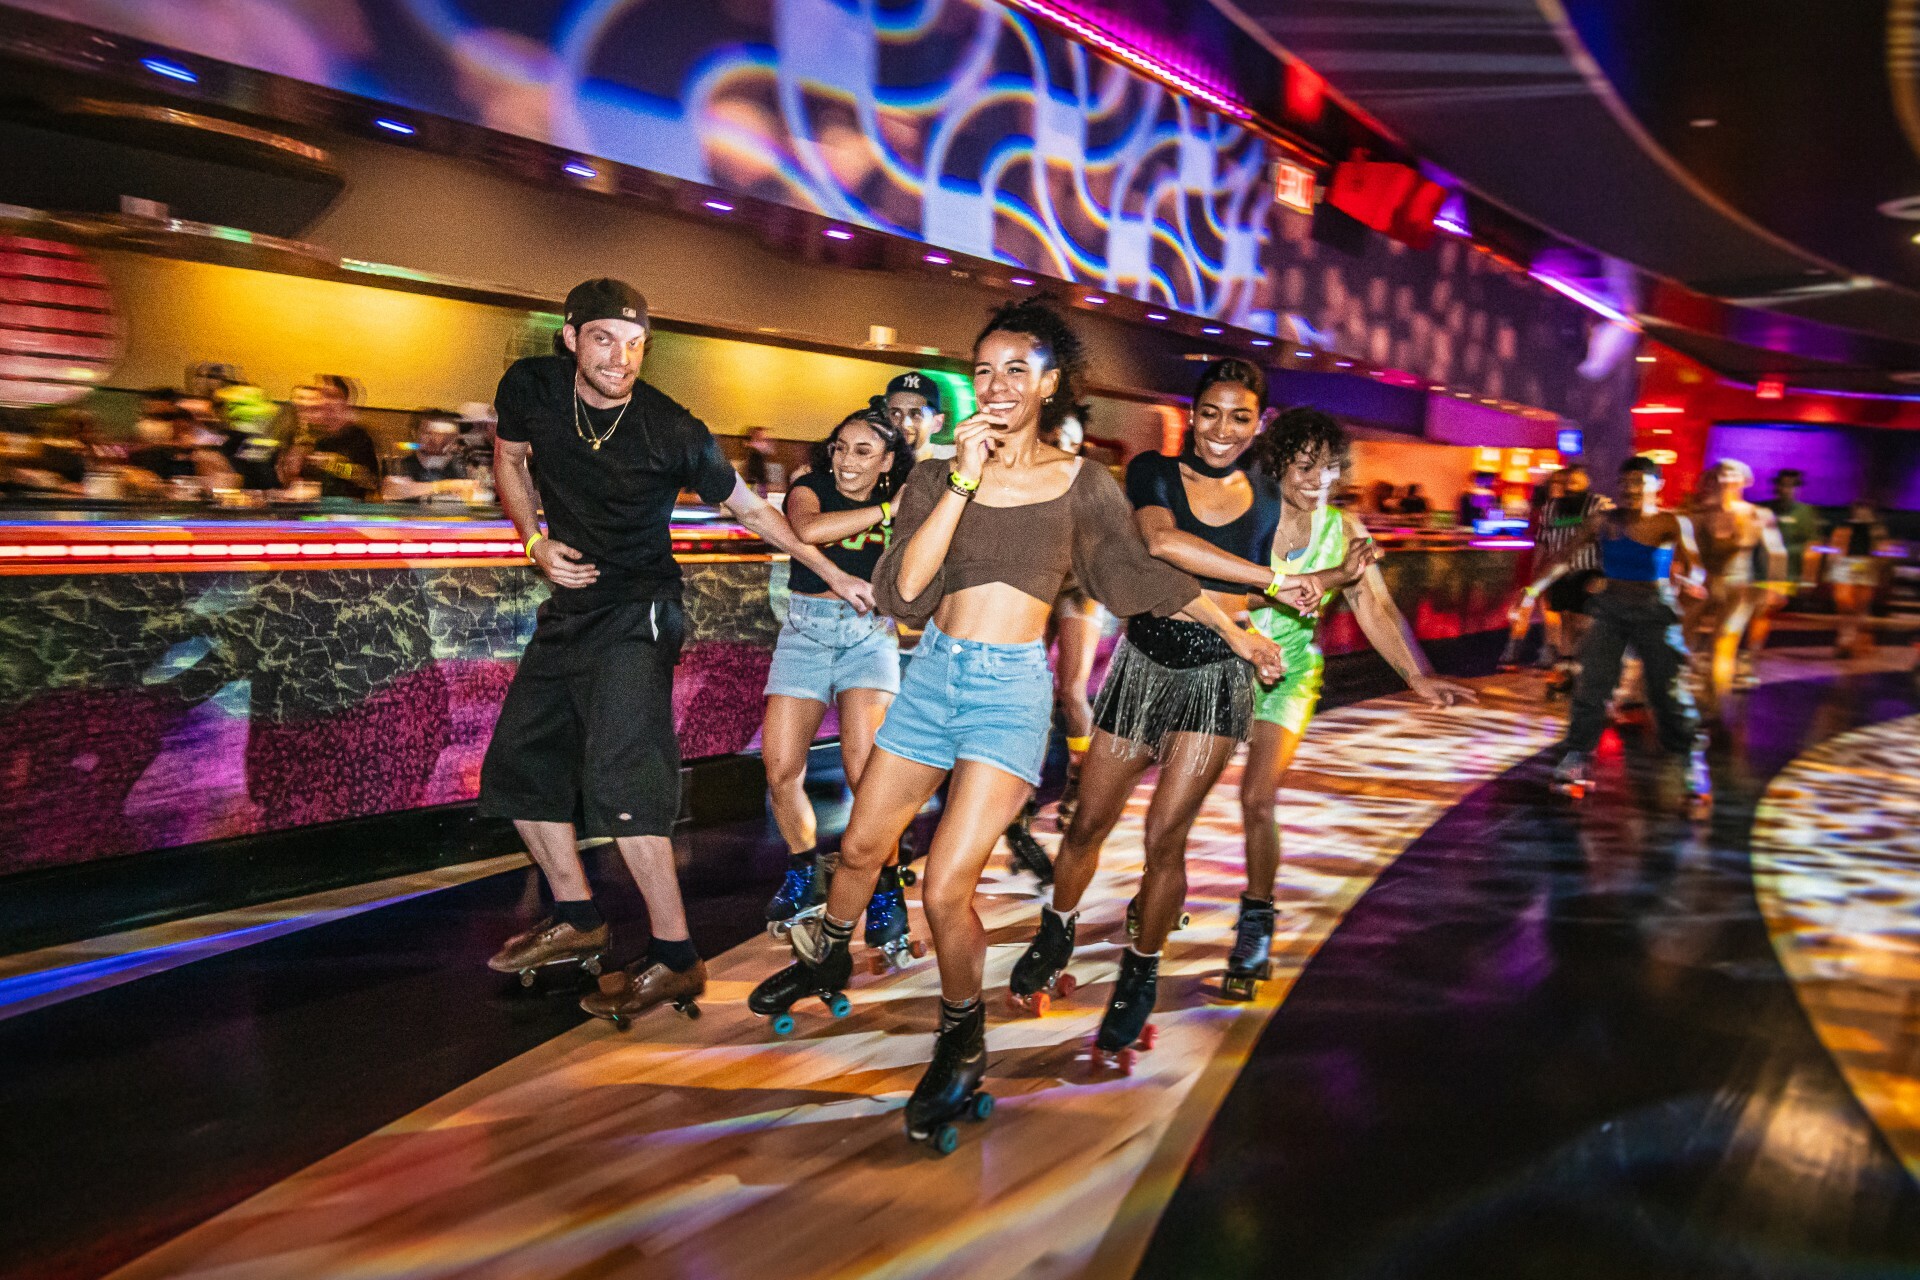 At Xanadu in Bushwick, NYC roller skaters find a new home